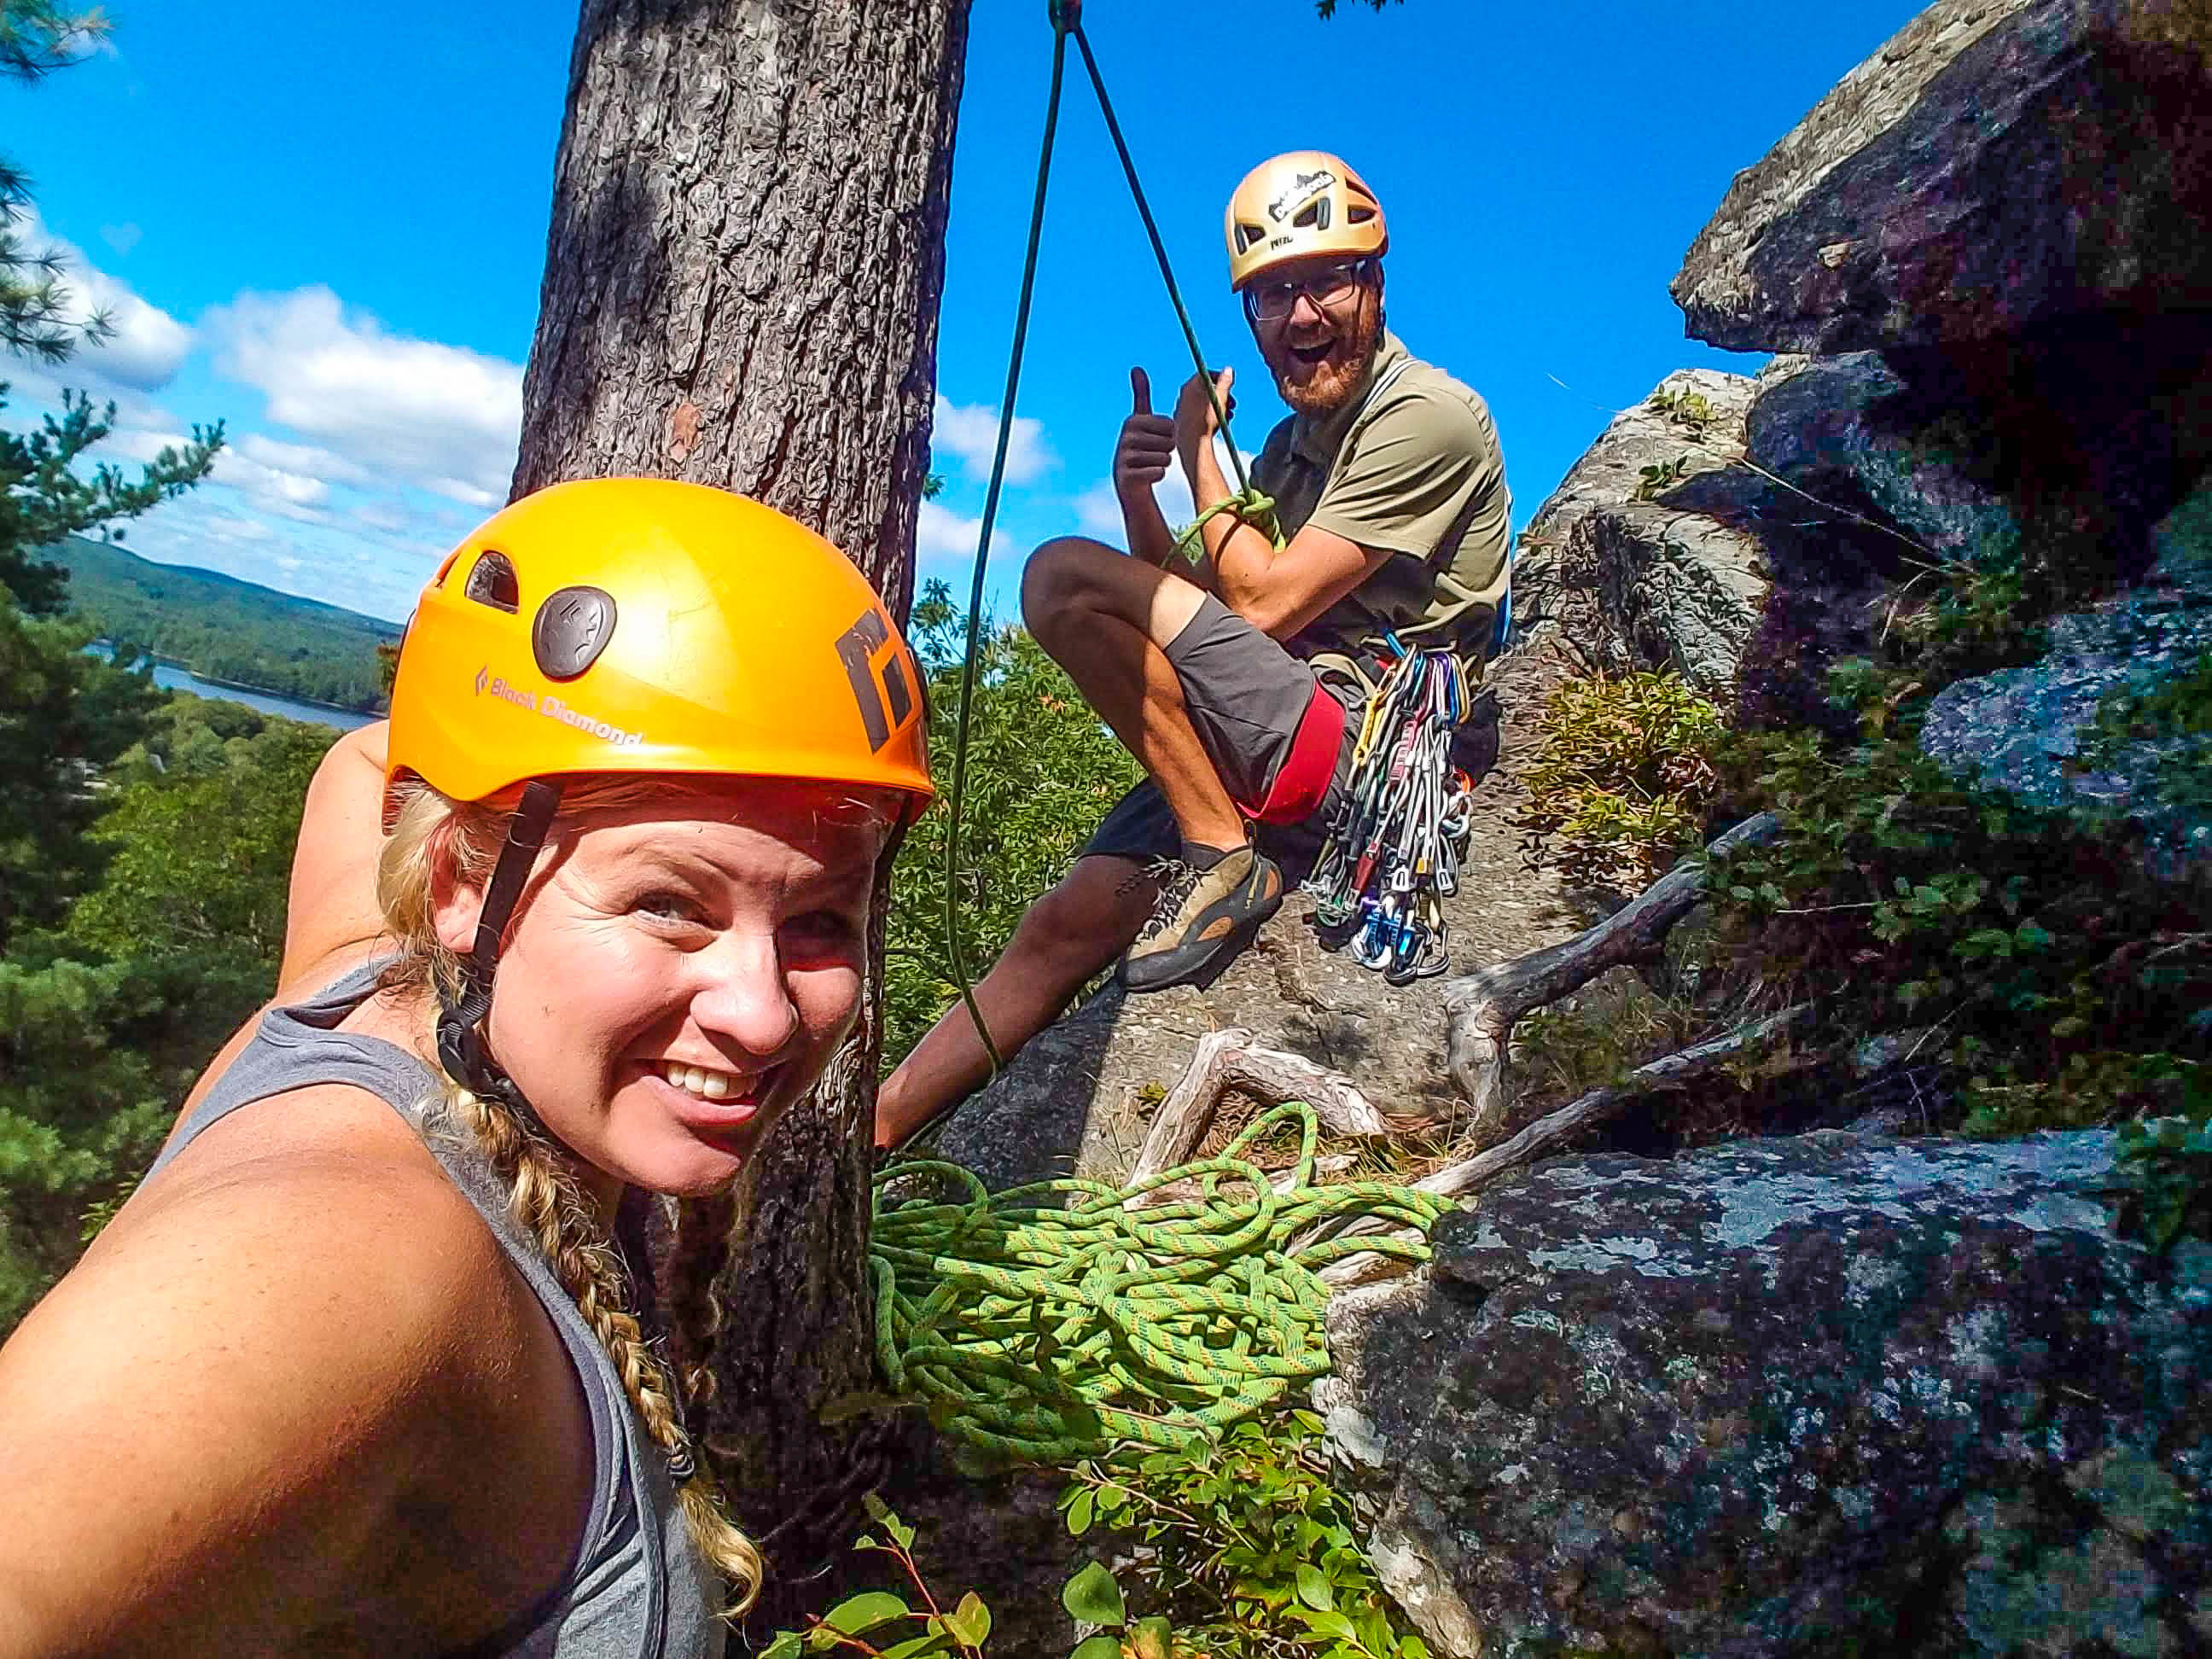 You are currently viewing Rock Climbing in Camden, Maine with Equinox Guide Service